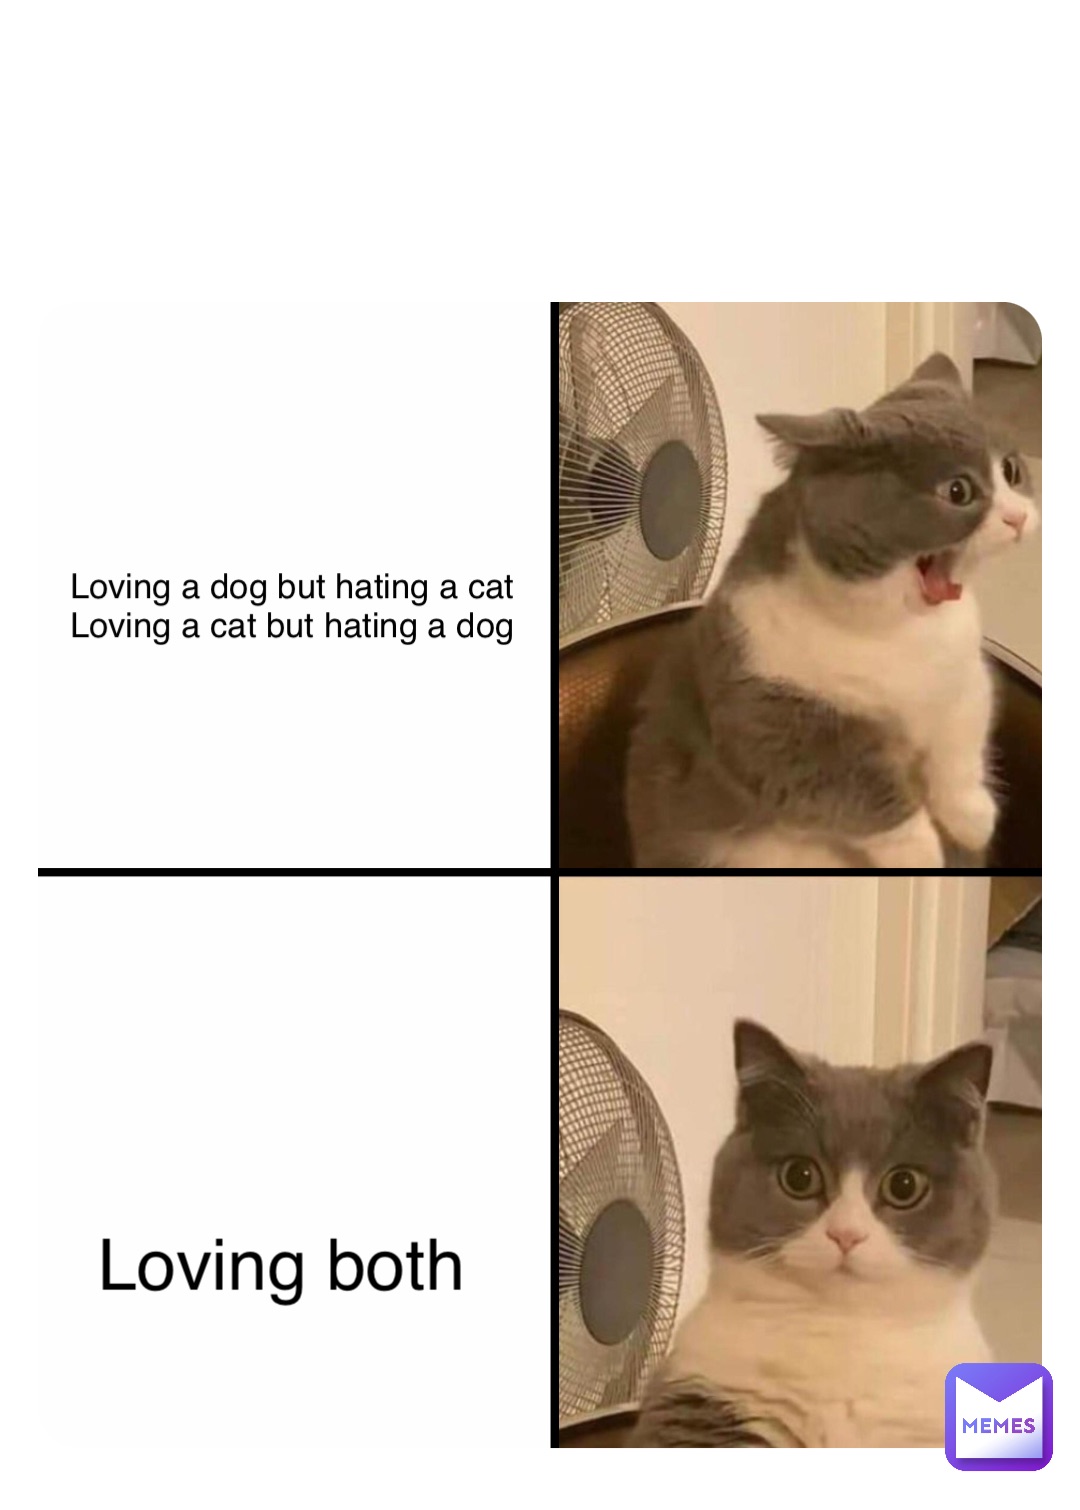 Double tap to edit Loving a dog but hating a cat
Loving a cat but hating a dog Loving both